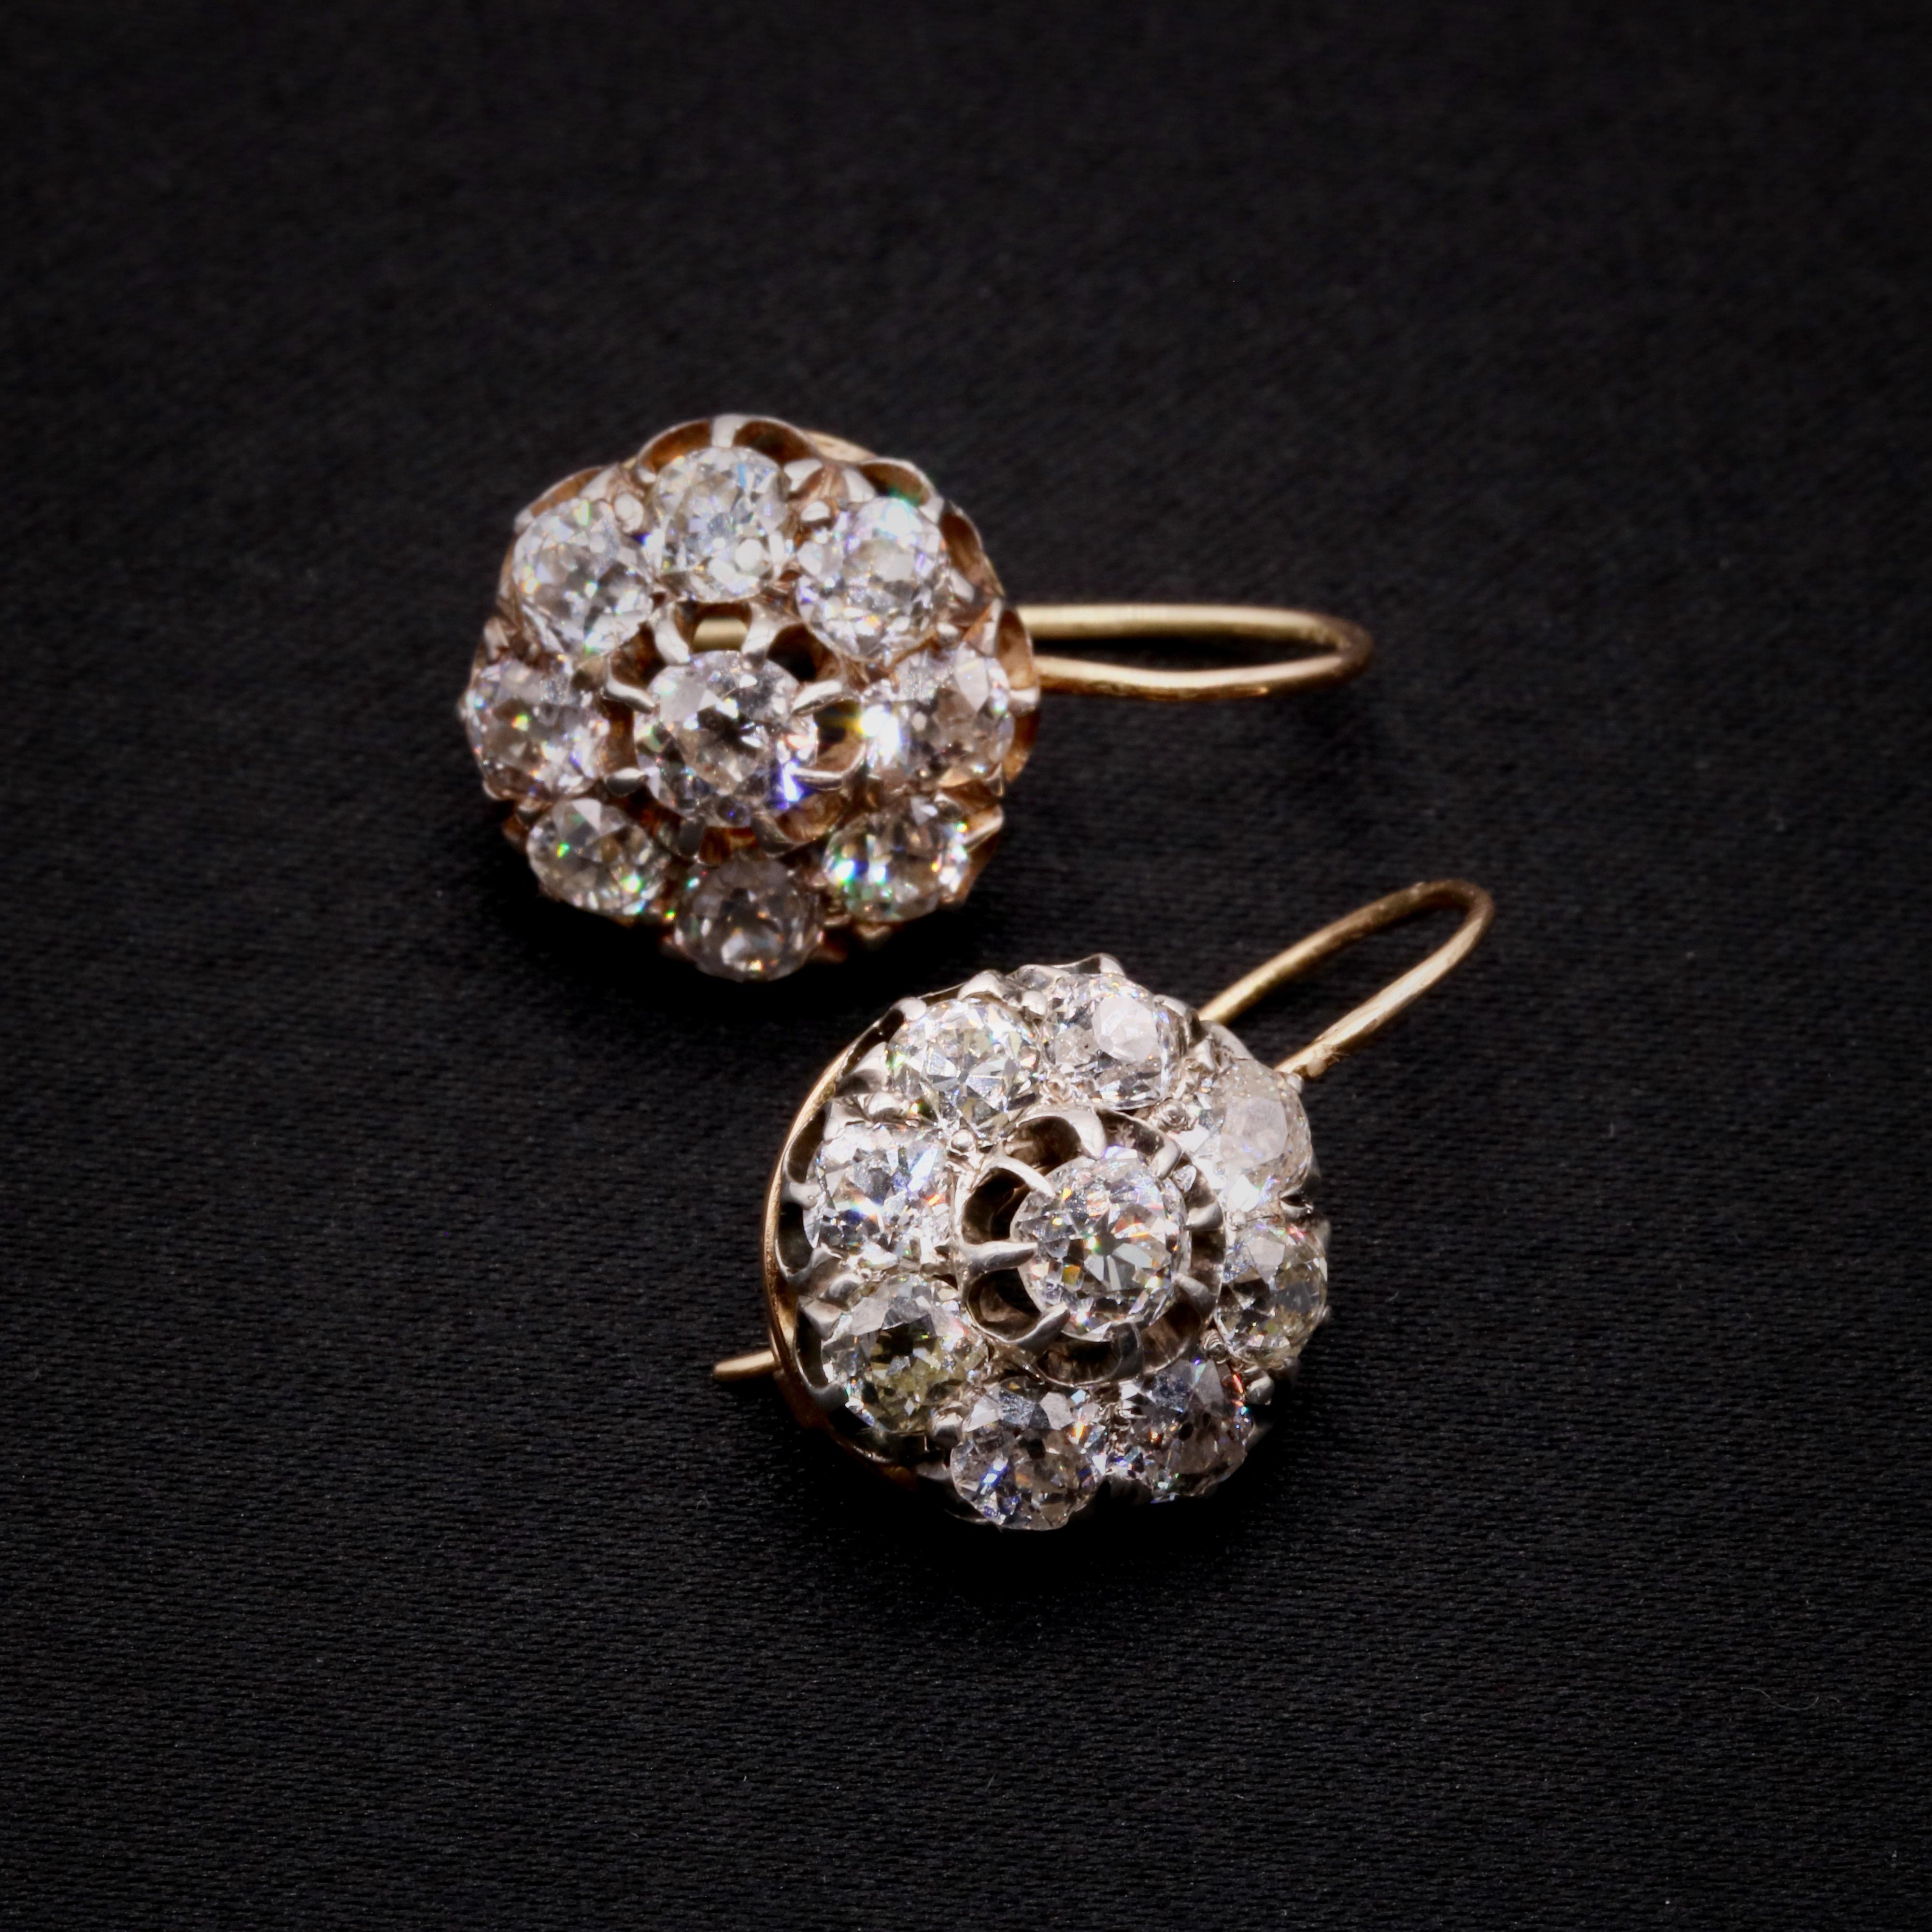 Old European Cut Antique Victorian 18K Gold & Silver 4.67ctw Old Cut Diamond Cluster Earrings For Sale